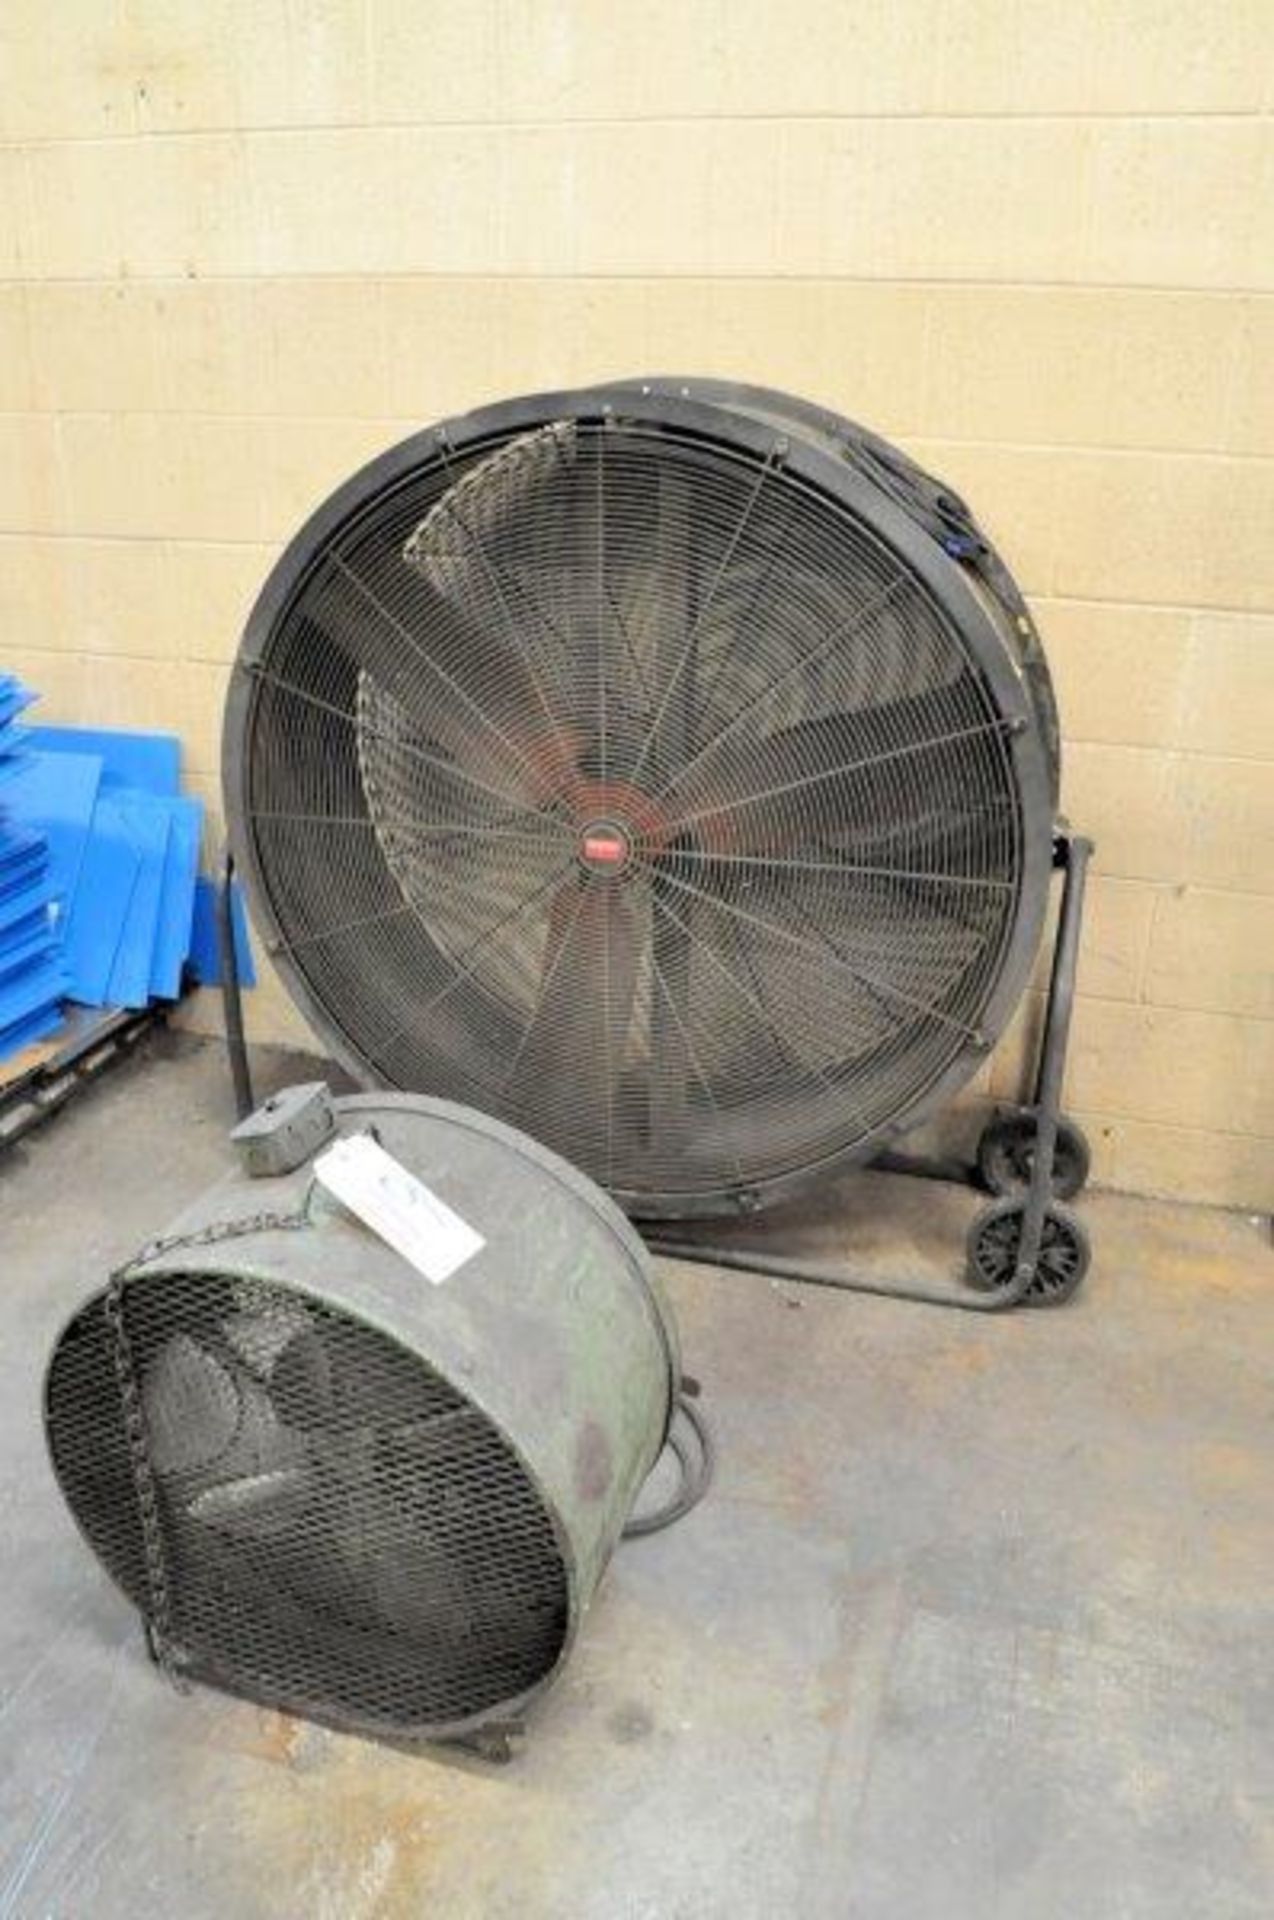 Lot-(1) Dayton 40" and (1) No Name 18" Portable Drum Fans, (Metal Fab Room)